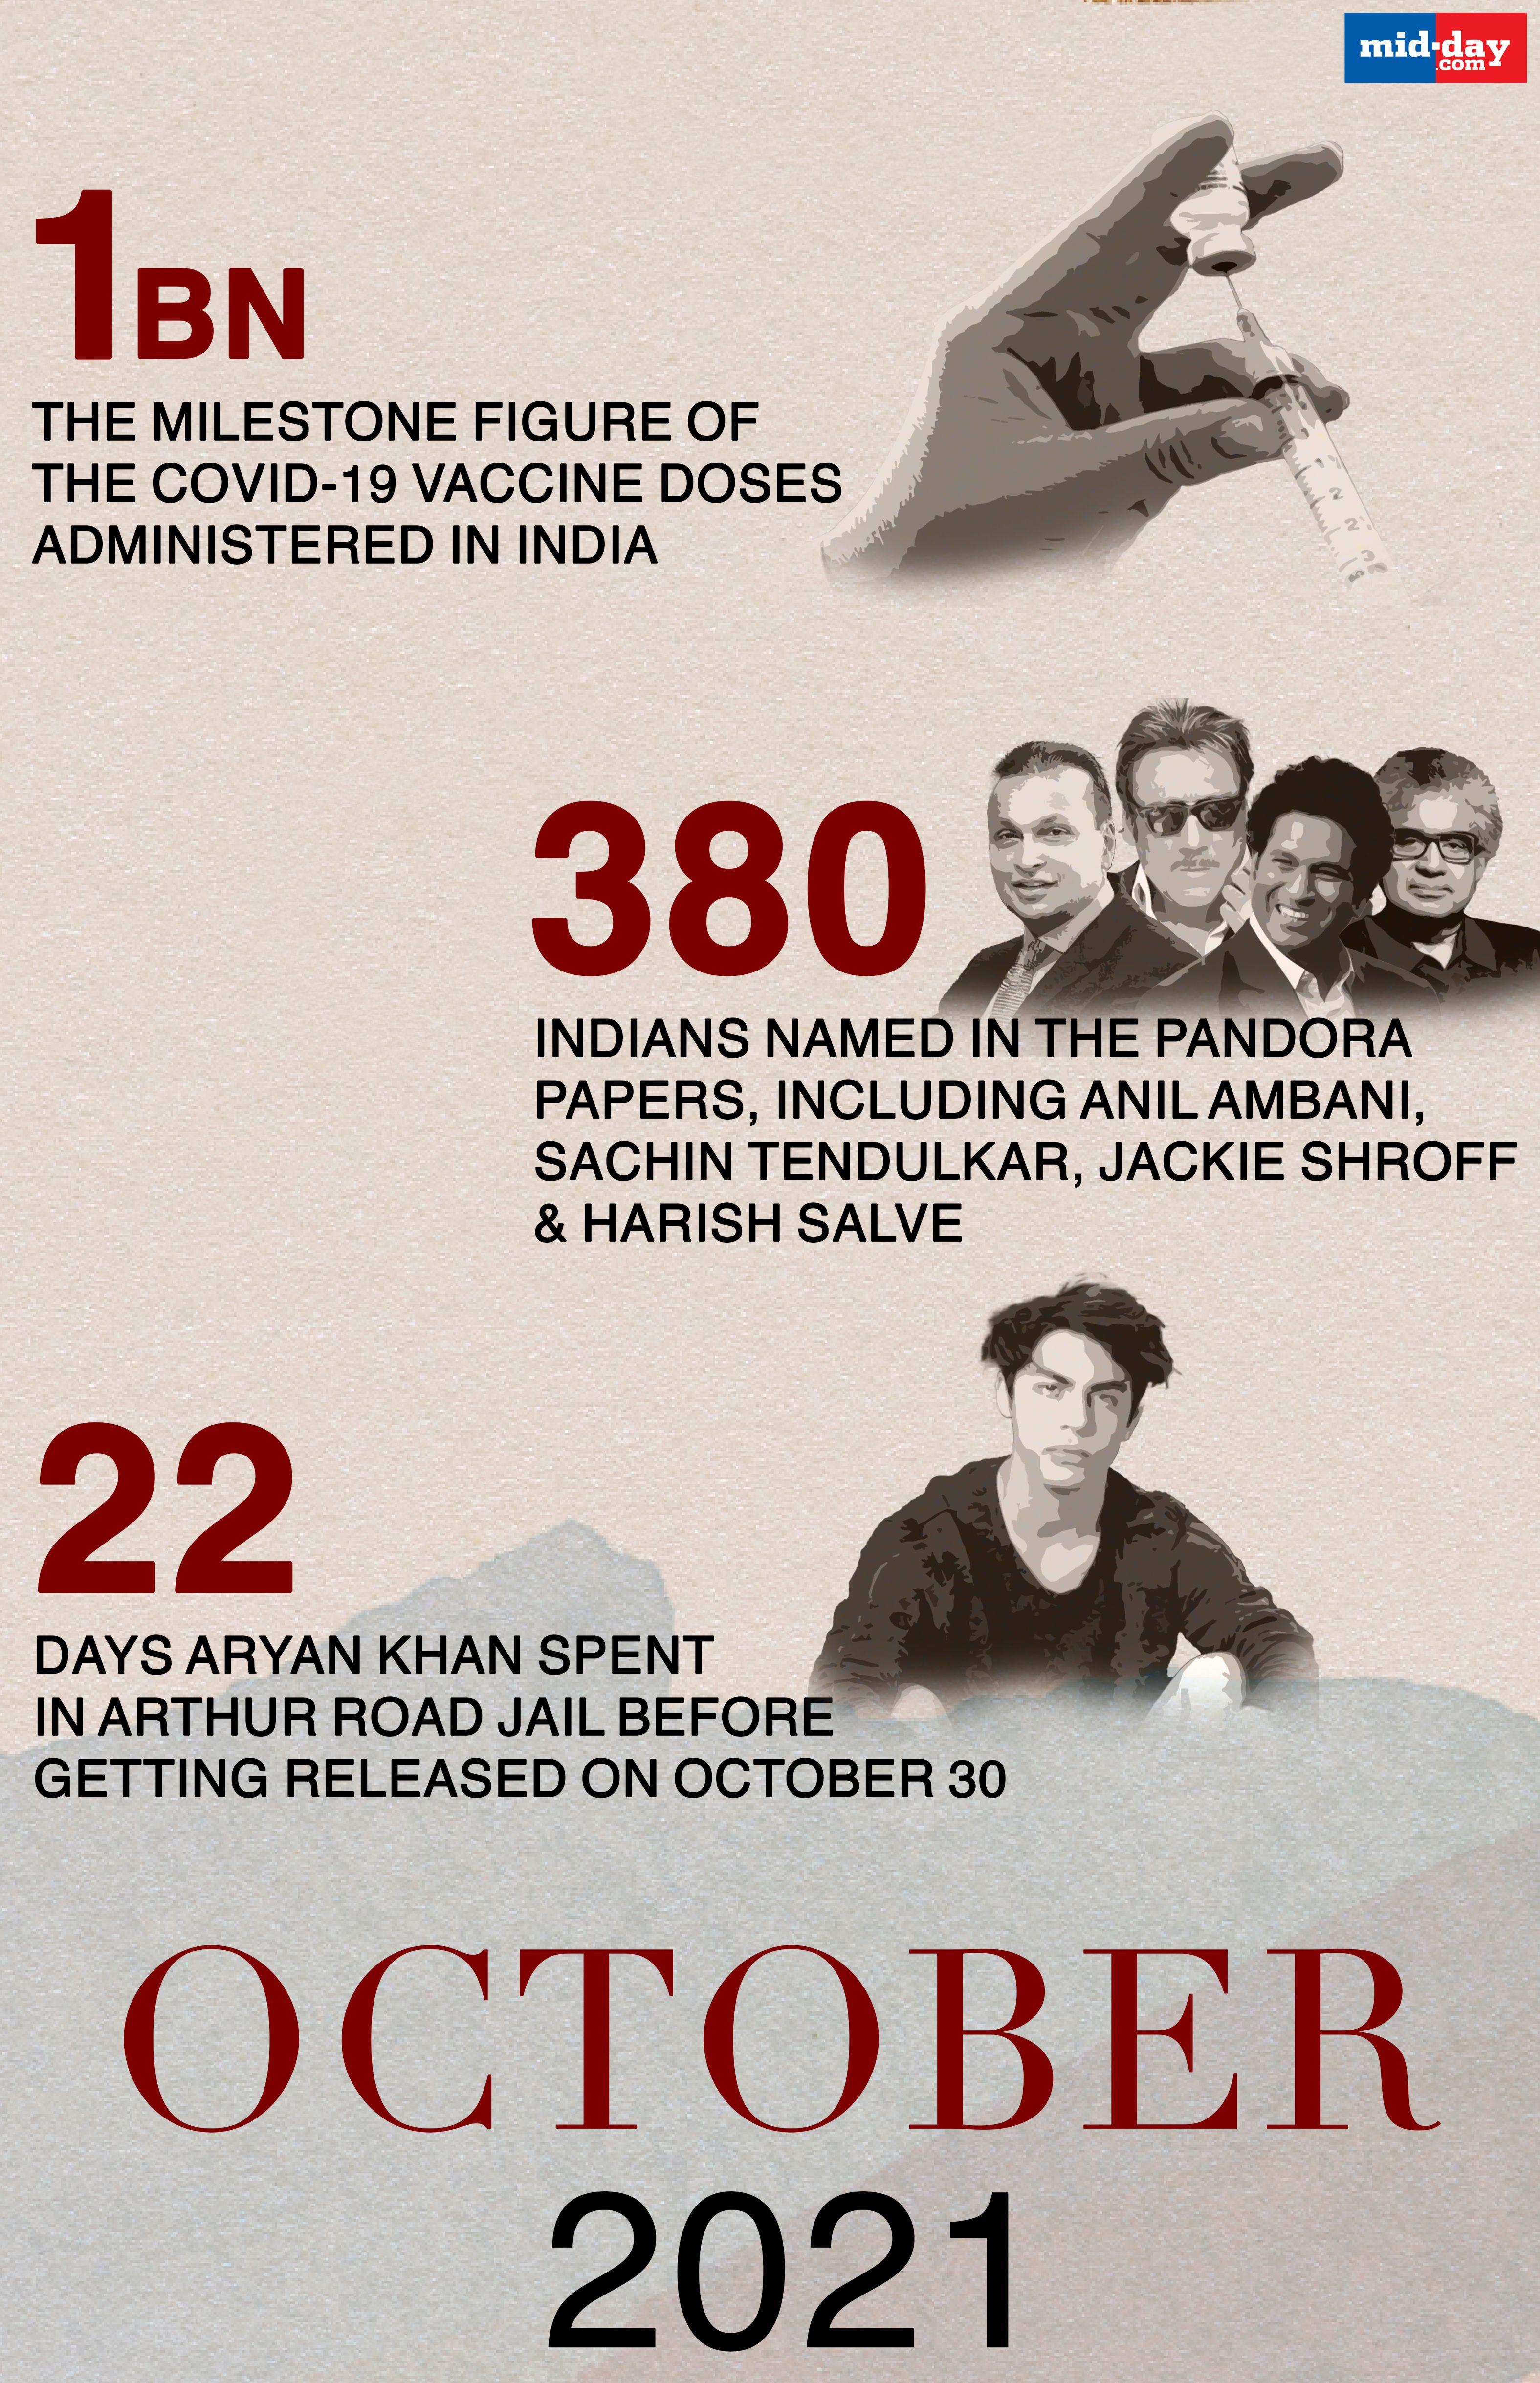 Within a fortnight of scripting history, India's first homegrown vaccine, Covaxin, too won WHO's emergency use listing